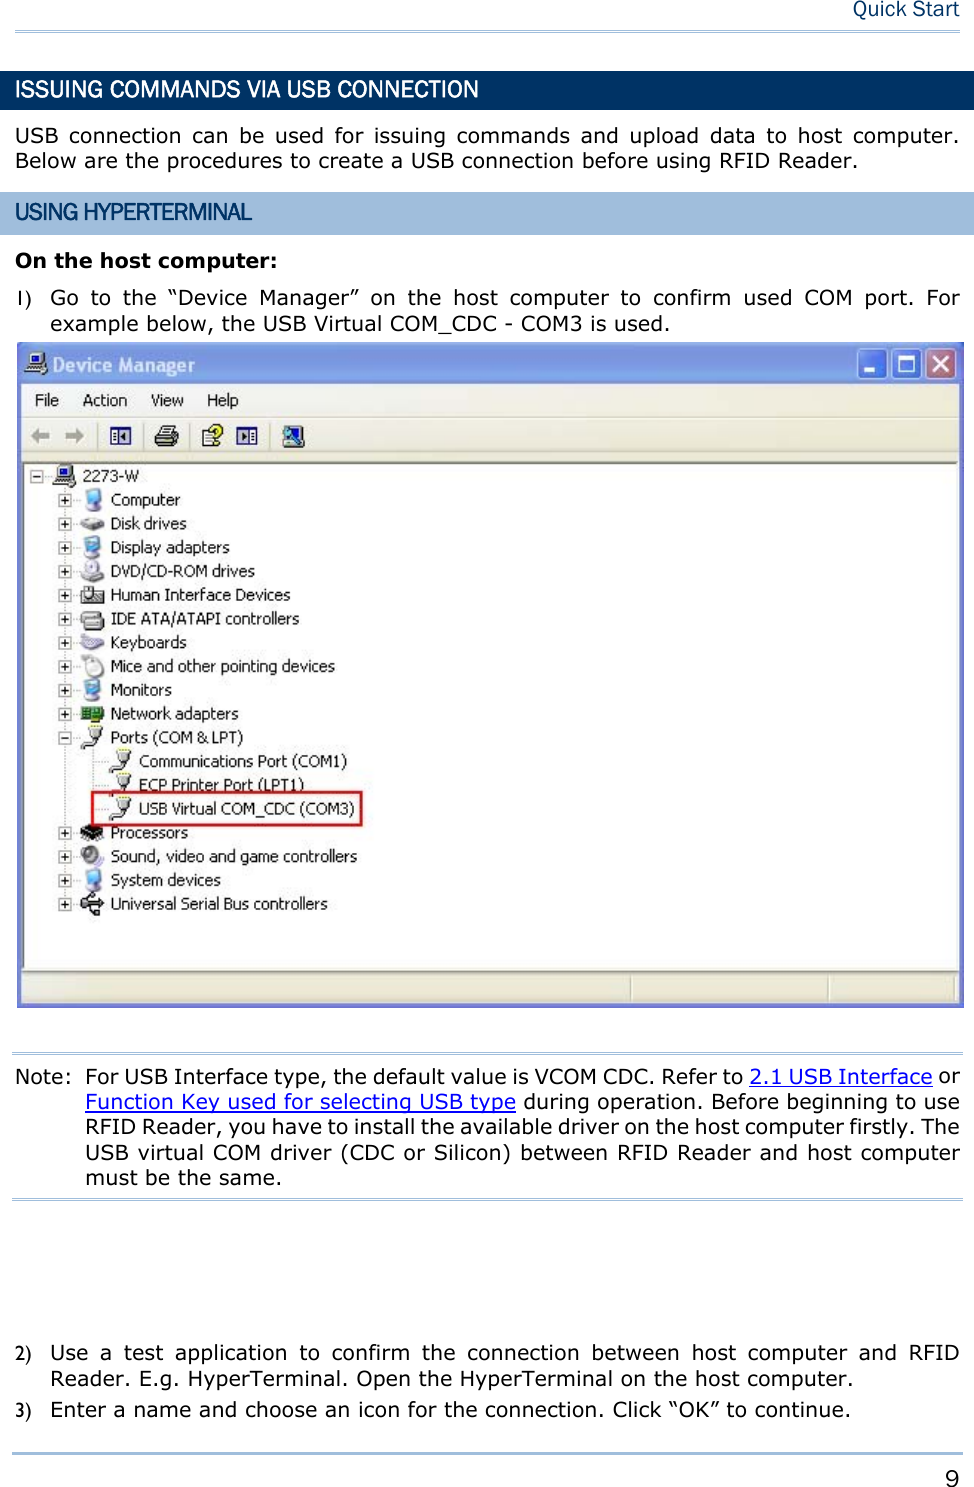     9   Quick Start ISSUING COMMANDS VIA USB CONNECTION USB connection can be used for issuing commands and upload data to host computer. Below are the procedures to create a USB connection before using RFID Reader. USING HYPERTERMINAL On the host computer: 1) Go to the “Device Manager” on the host computer to confirm used COM port. For example below, the USB Virtual COM_CDC - COM3 is used.     Note:  For USB Interface type, the default value is VCOM CDC. Refer to 2.1 USB Interface or Function Key used for selecting USB type during operation. Before beginning to use RFID Reader, you have to install the available driver on the host computer firstly. The USB virtual COM driver (CDC or Silicon) between RFID Reader and host computer must be the same.     2) Use a test application to confirm the connection between host computer and RFID Reader. E.g. HyperTerminal. Open the HyperTerminal on the host computer. 3) Enter a name and choose an icon for the connection. Click “OK” to continue. 